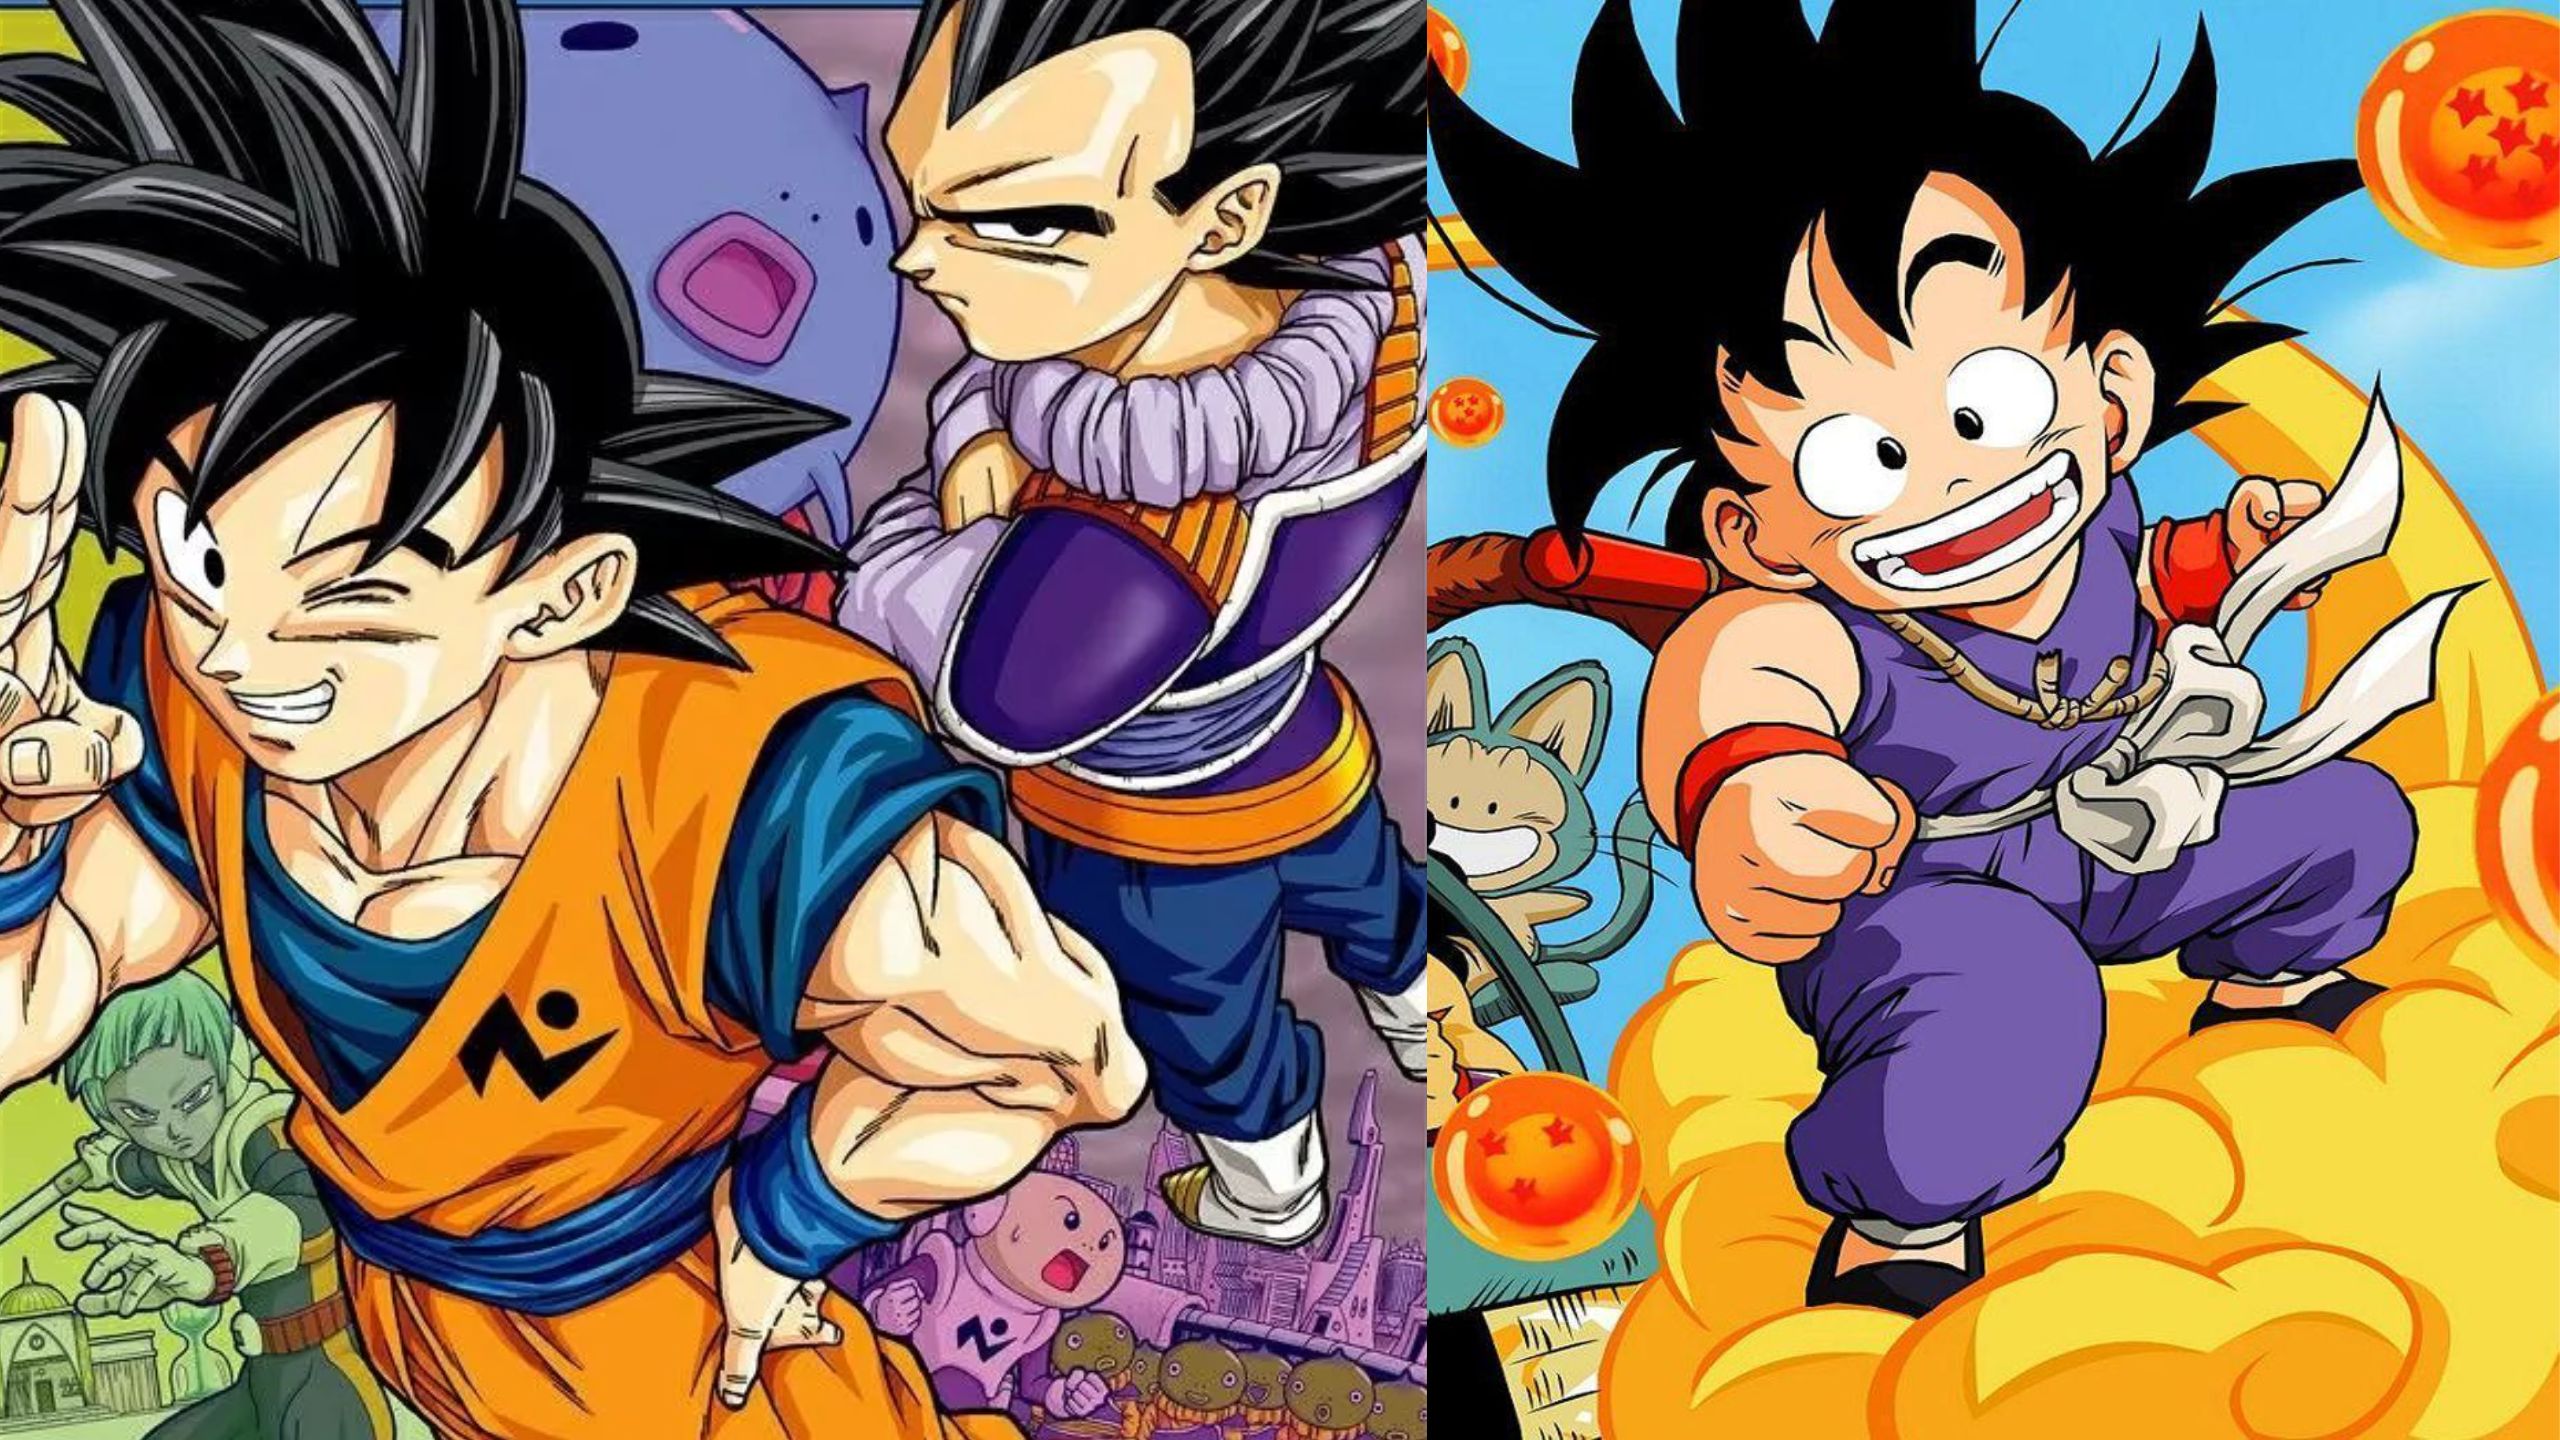 Why "Dragon Ball" Isn't in the Big Three Despite Its Massive Influence and PopularityWhy "Dragon Ball" Isn't in the Big Three Despite Its Massive Influence and Popularity